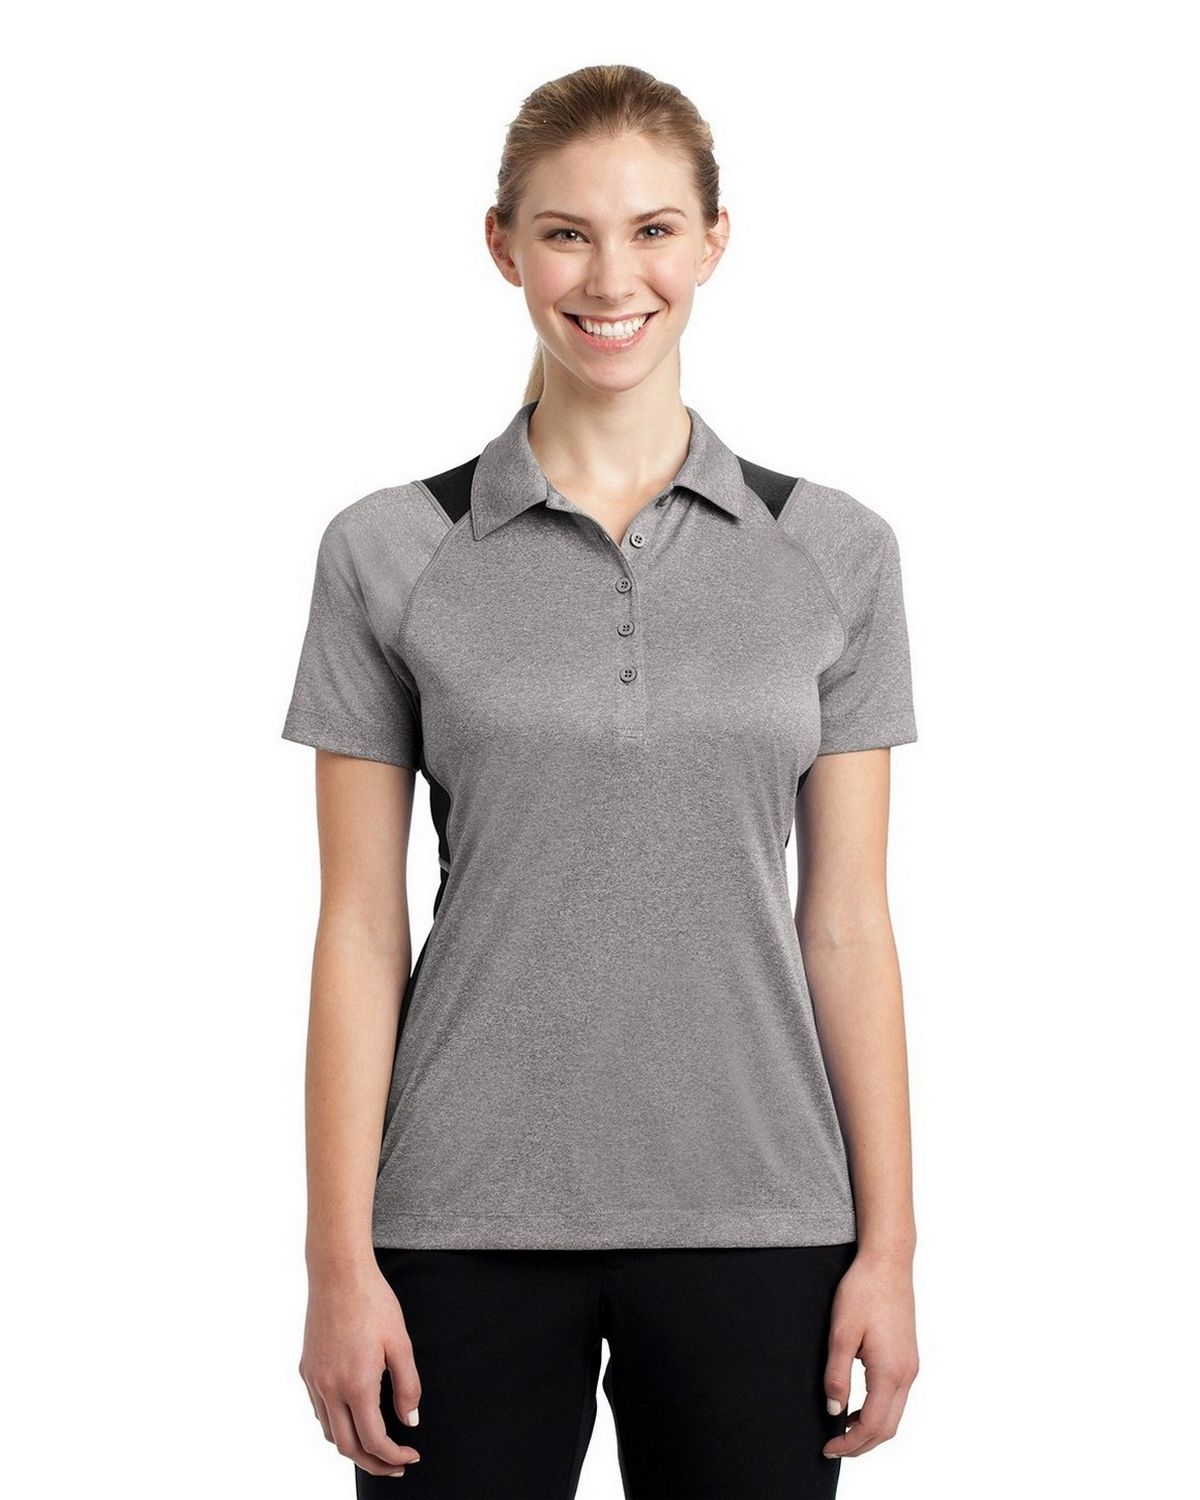 Color Block Polo Shirts for Men and Women